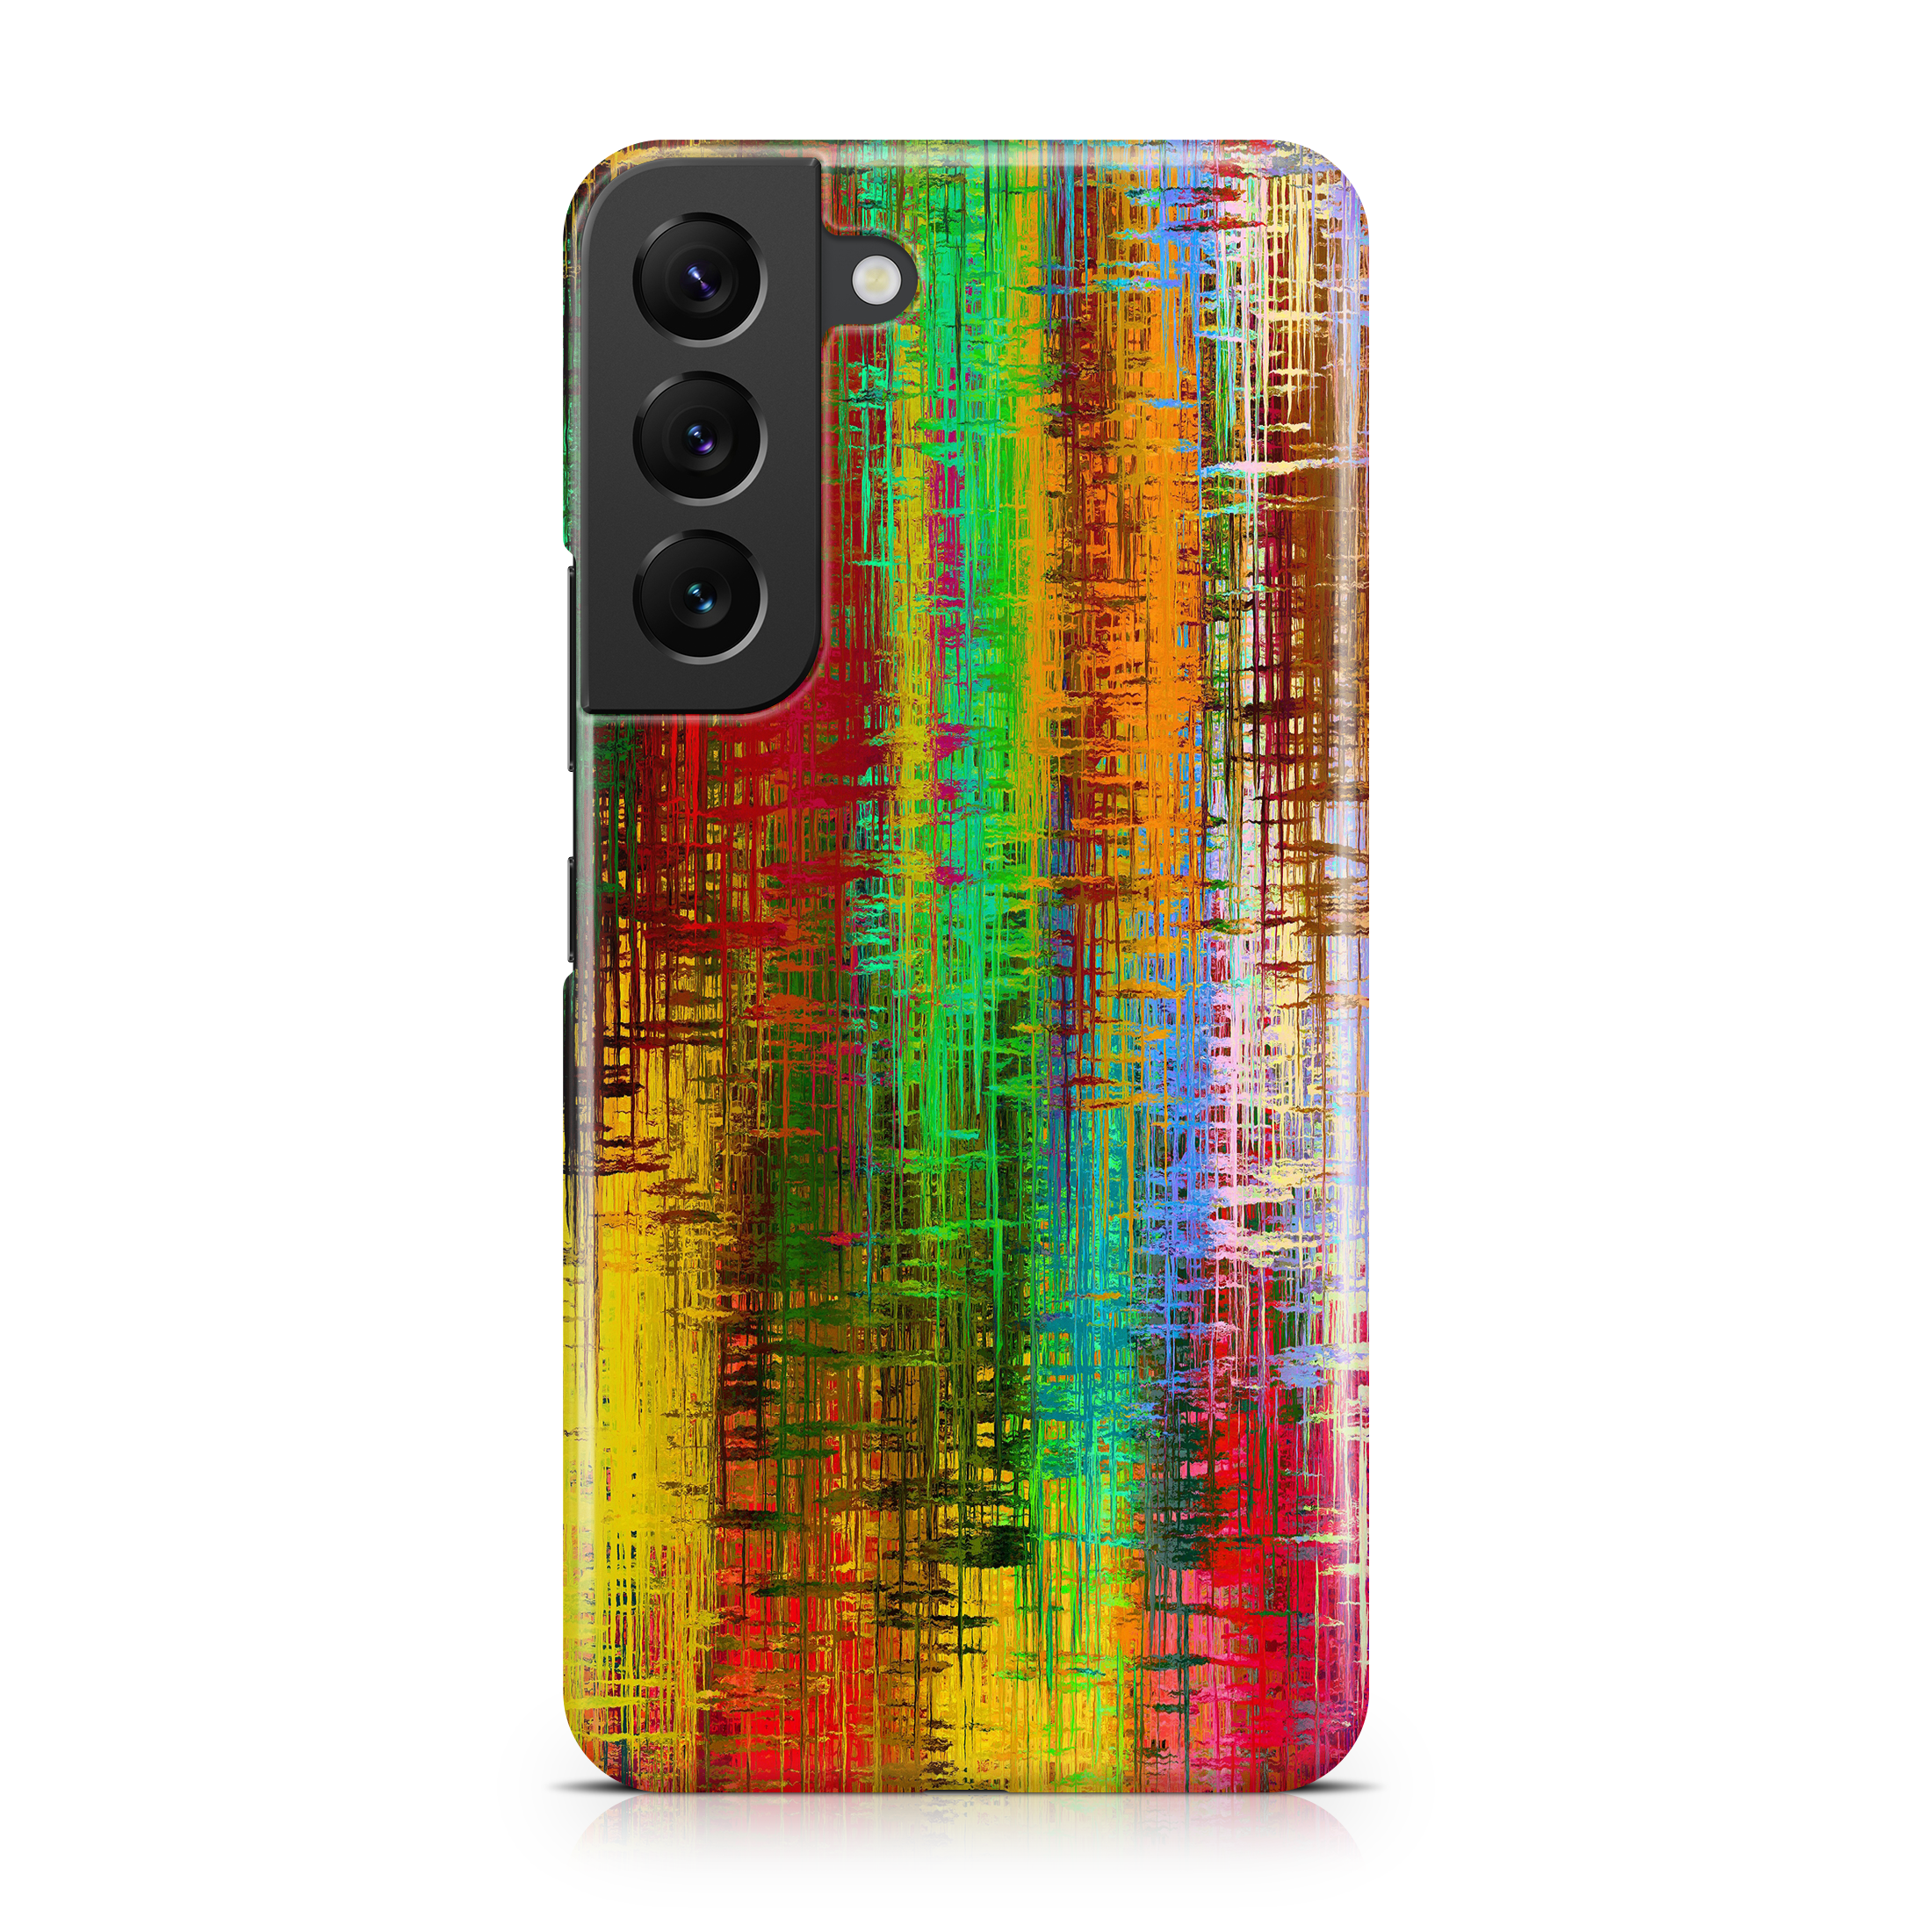 Multicolor Splash - Samsung phone case designs by CaseSwagger